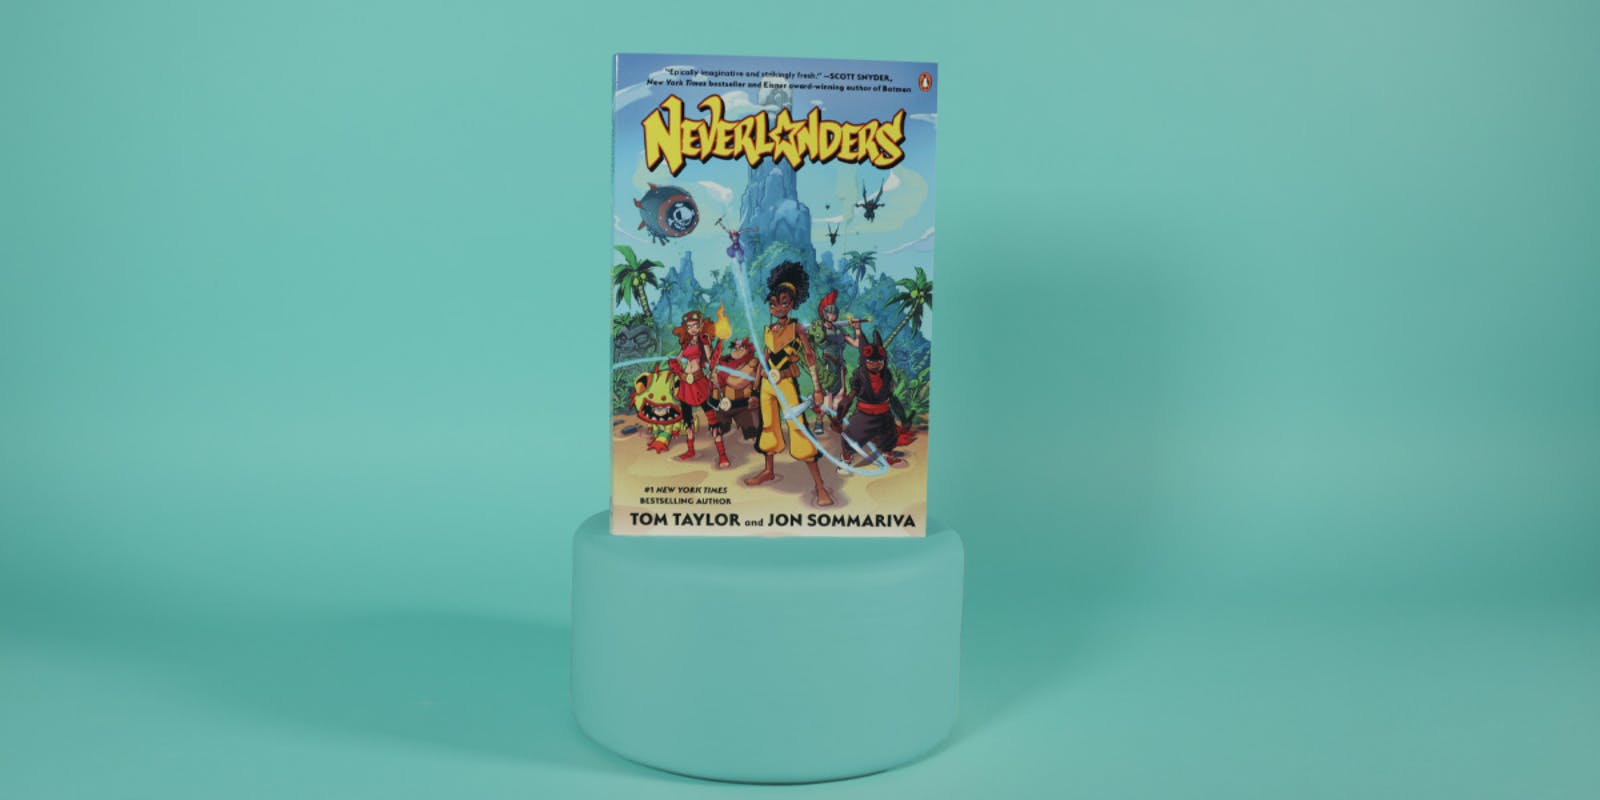 An inside scoop on the new Peter-Pan-inspired book, Neverlanders 